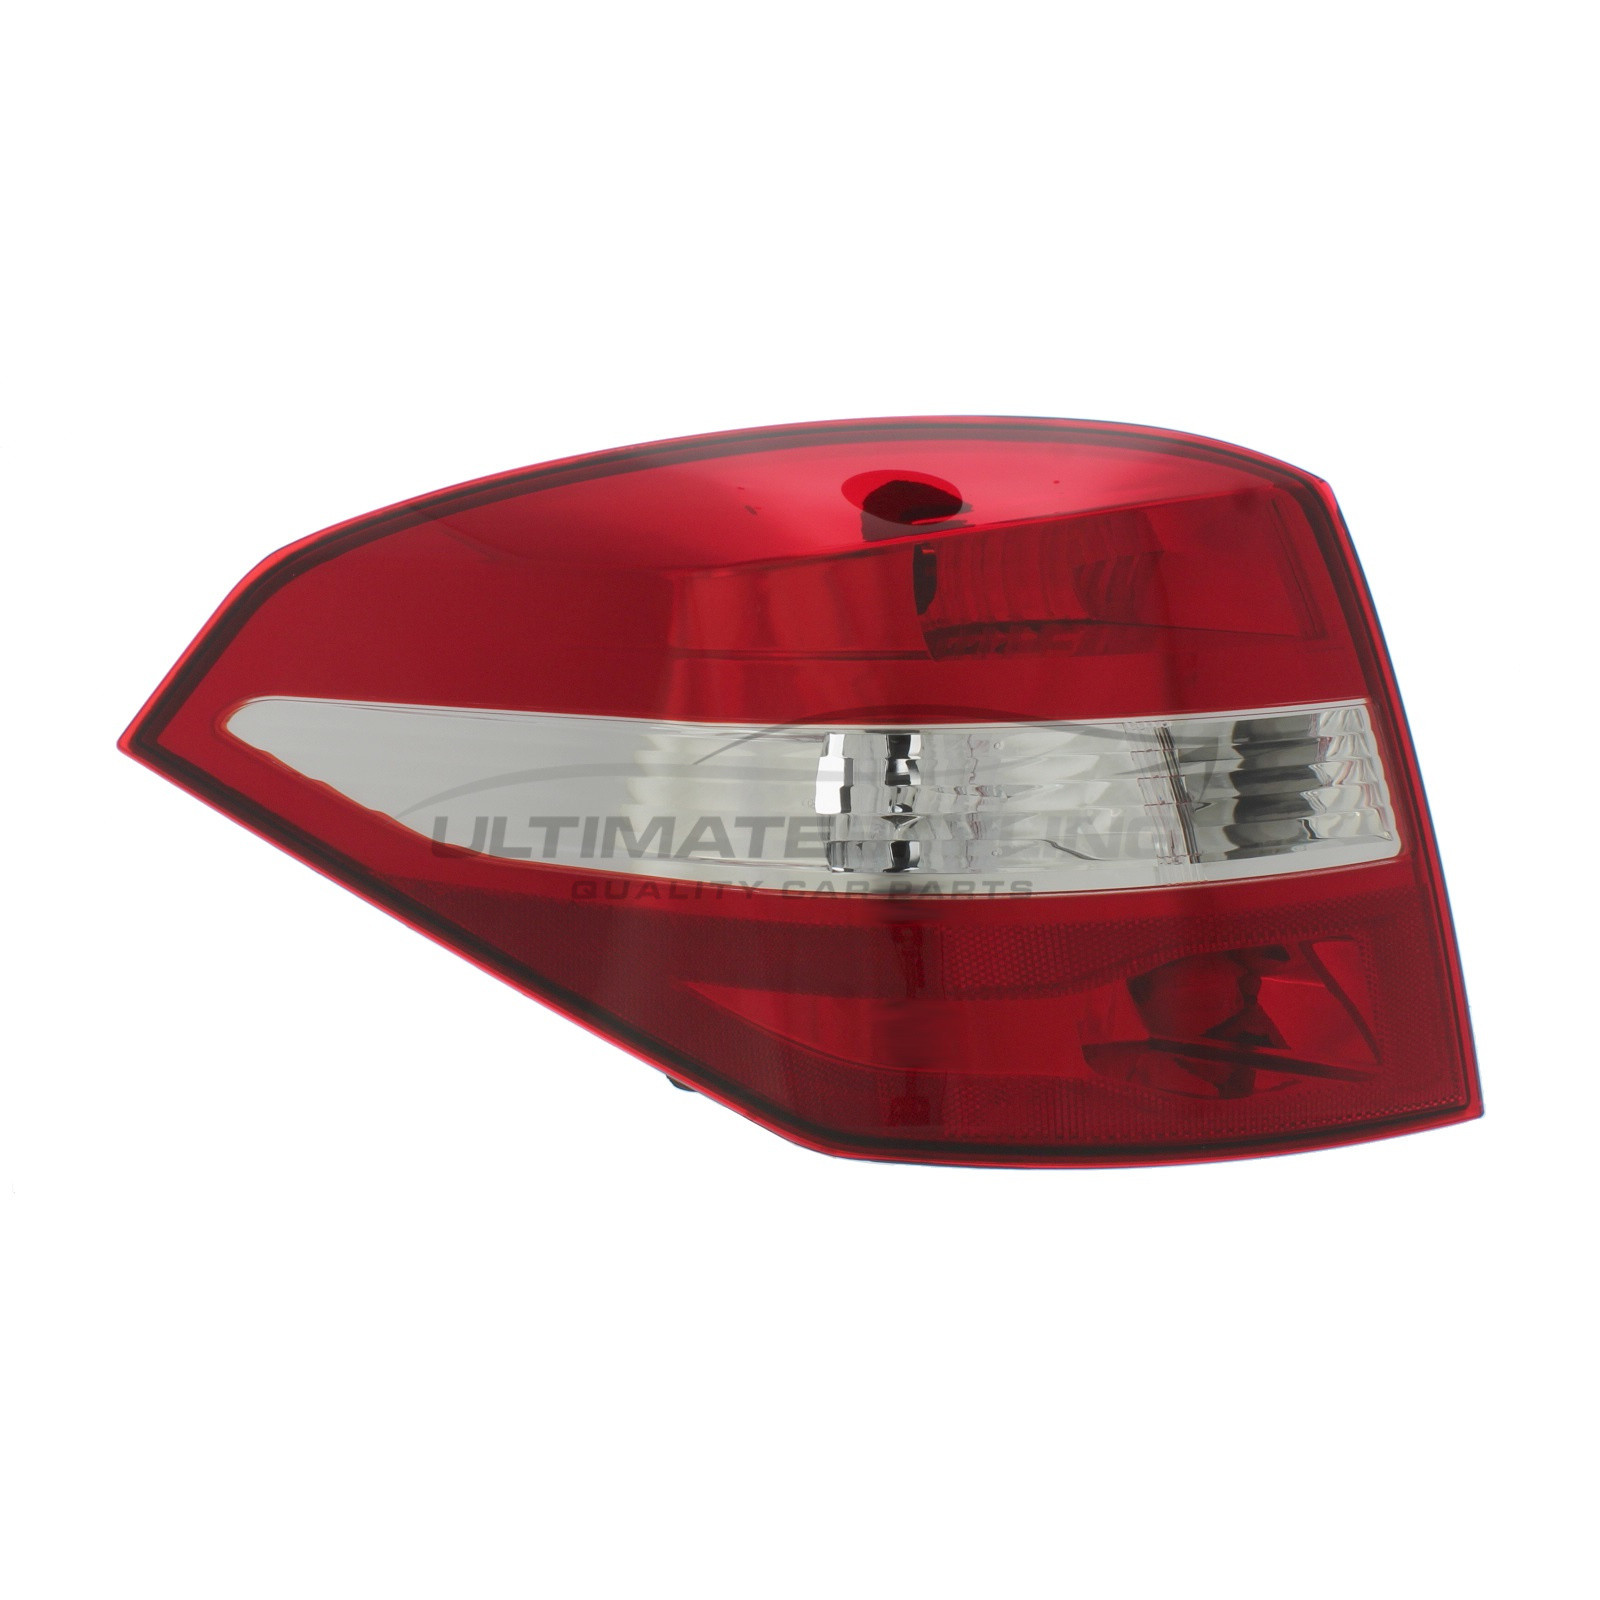 Renault Laguna 2007-2011 Non-LED with Clear Indicator Rear Light / Tail Light Excluding Bulb Holder Passenger Side (LH)